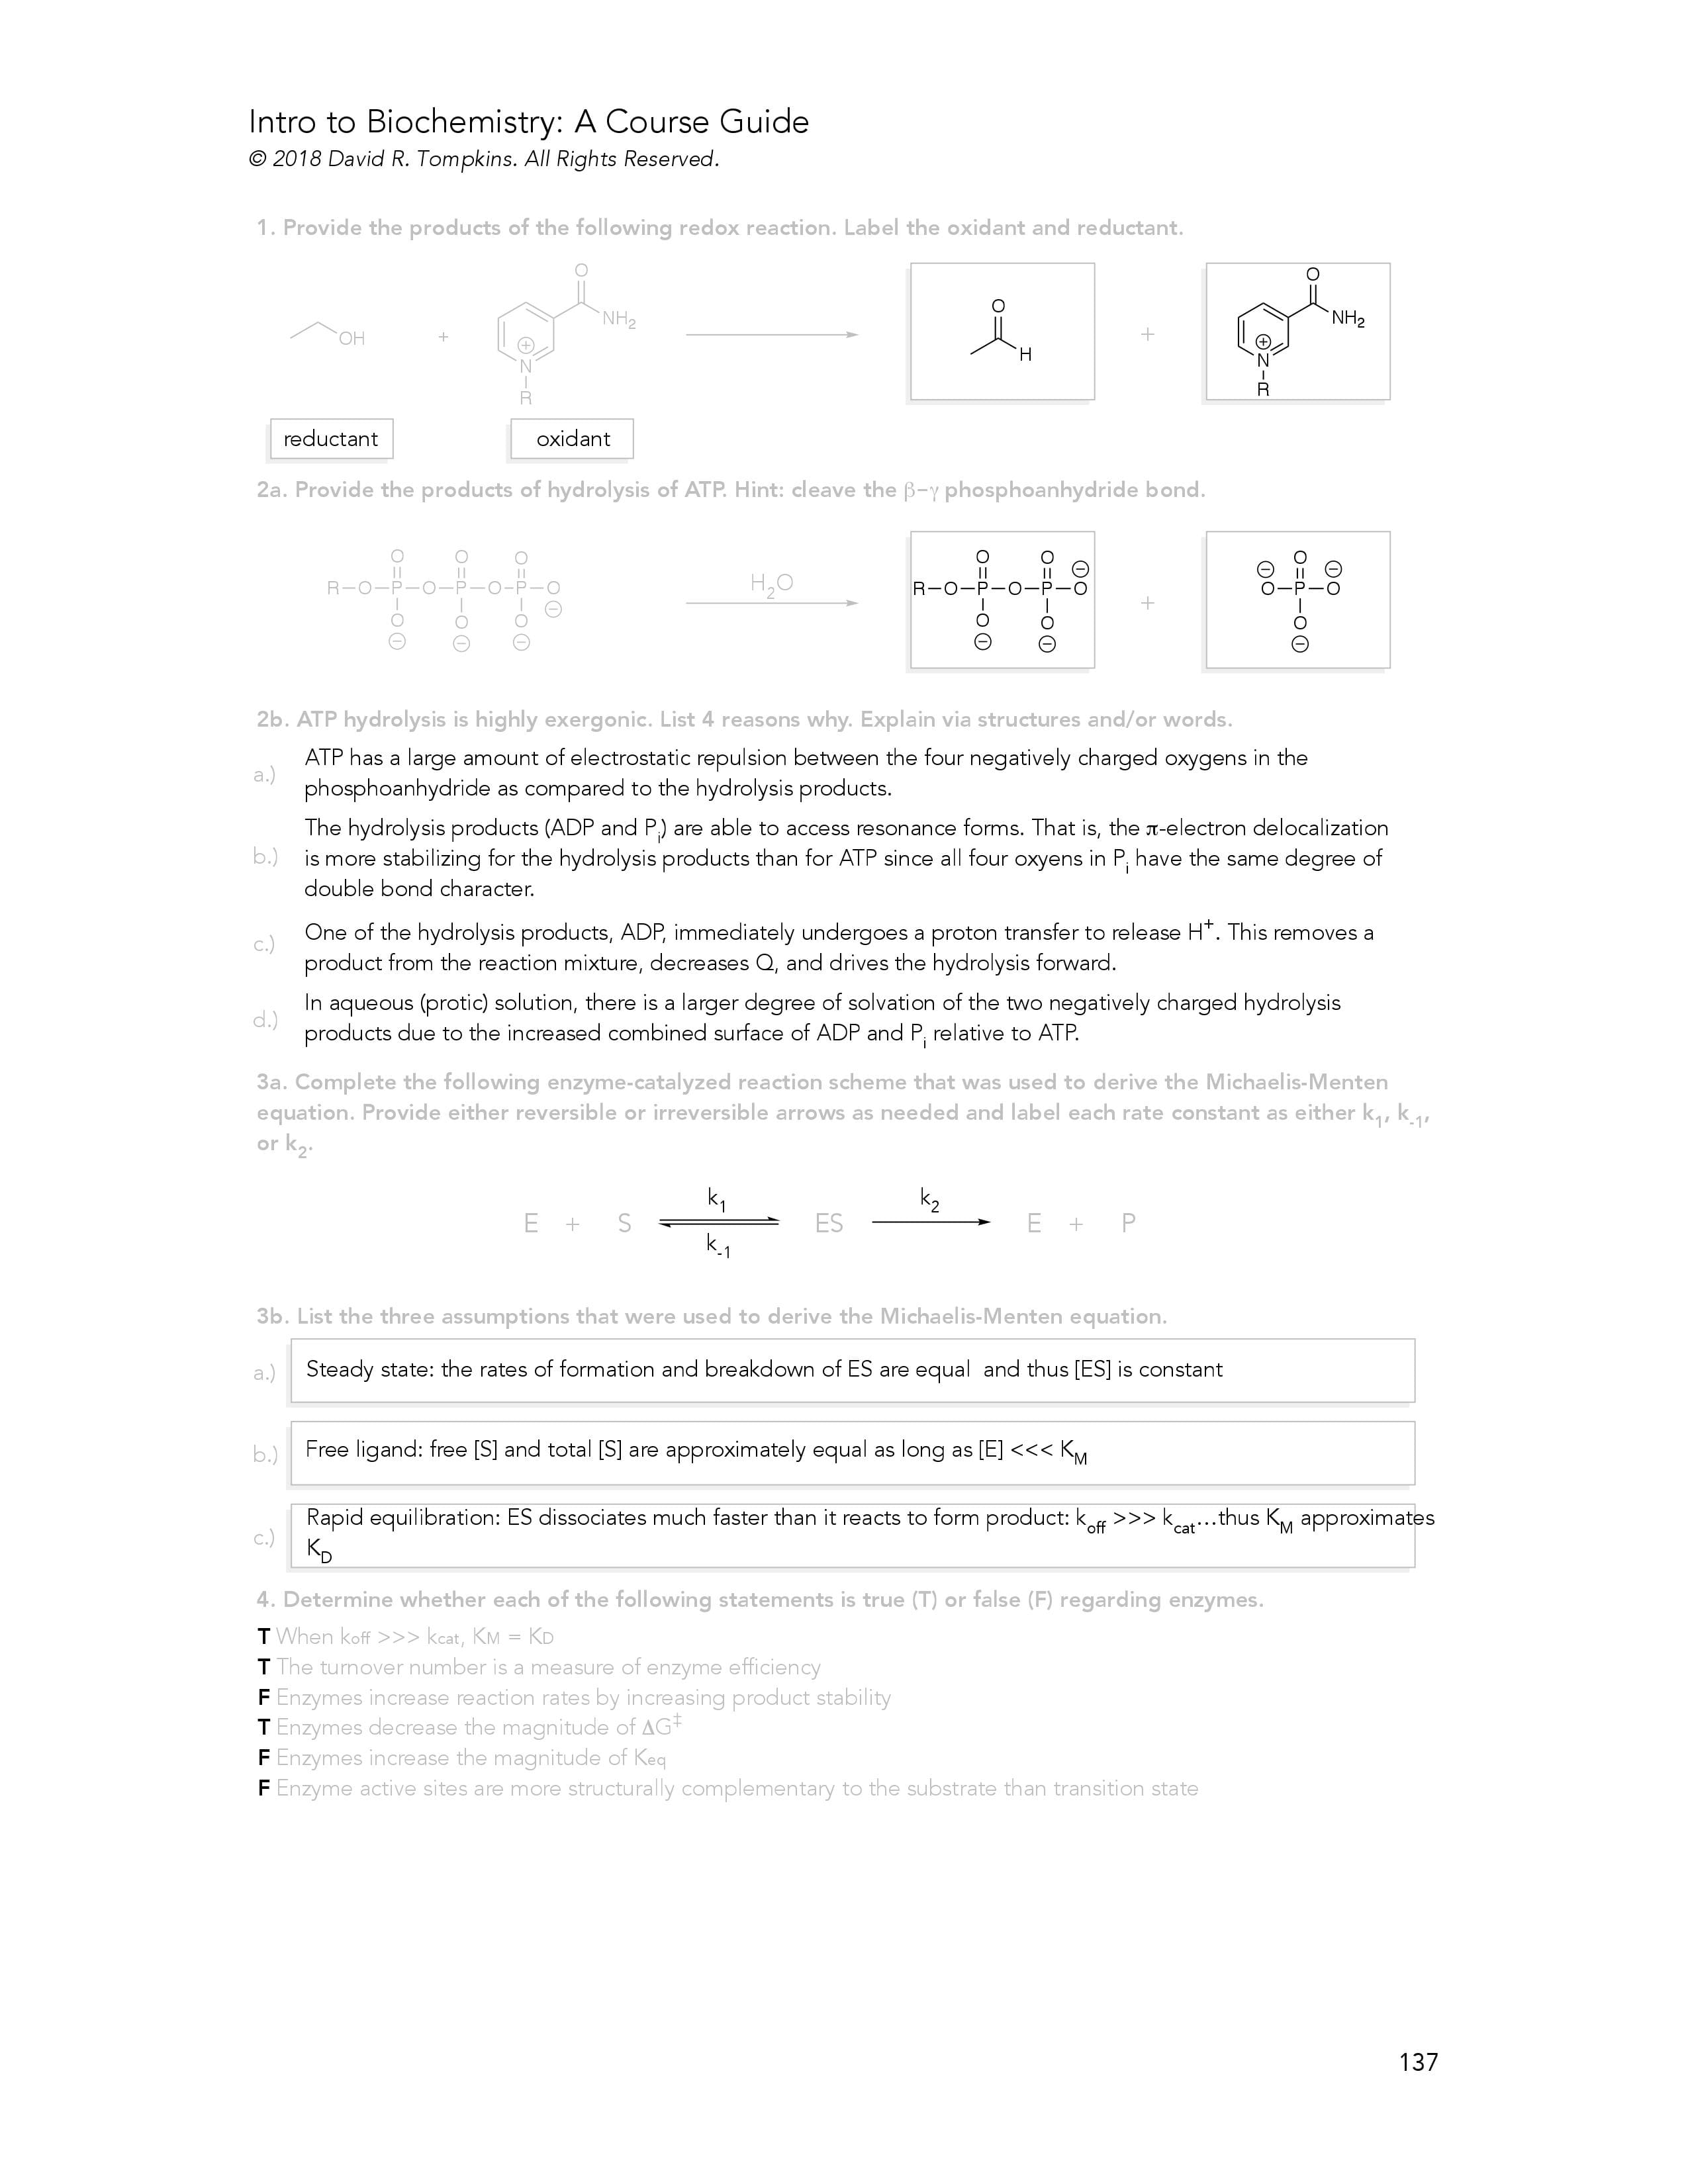 Introduction to Biochemistry Course Guide Example Page 5